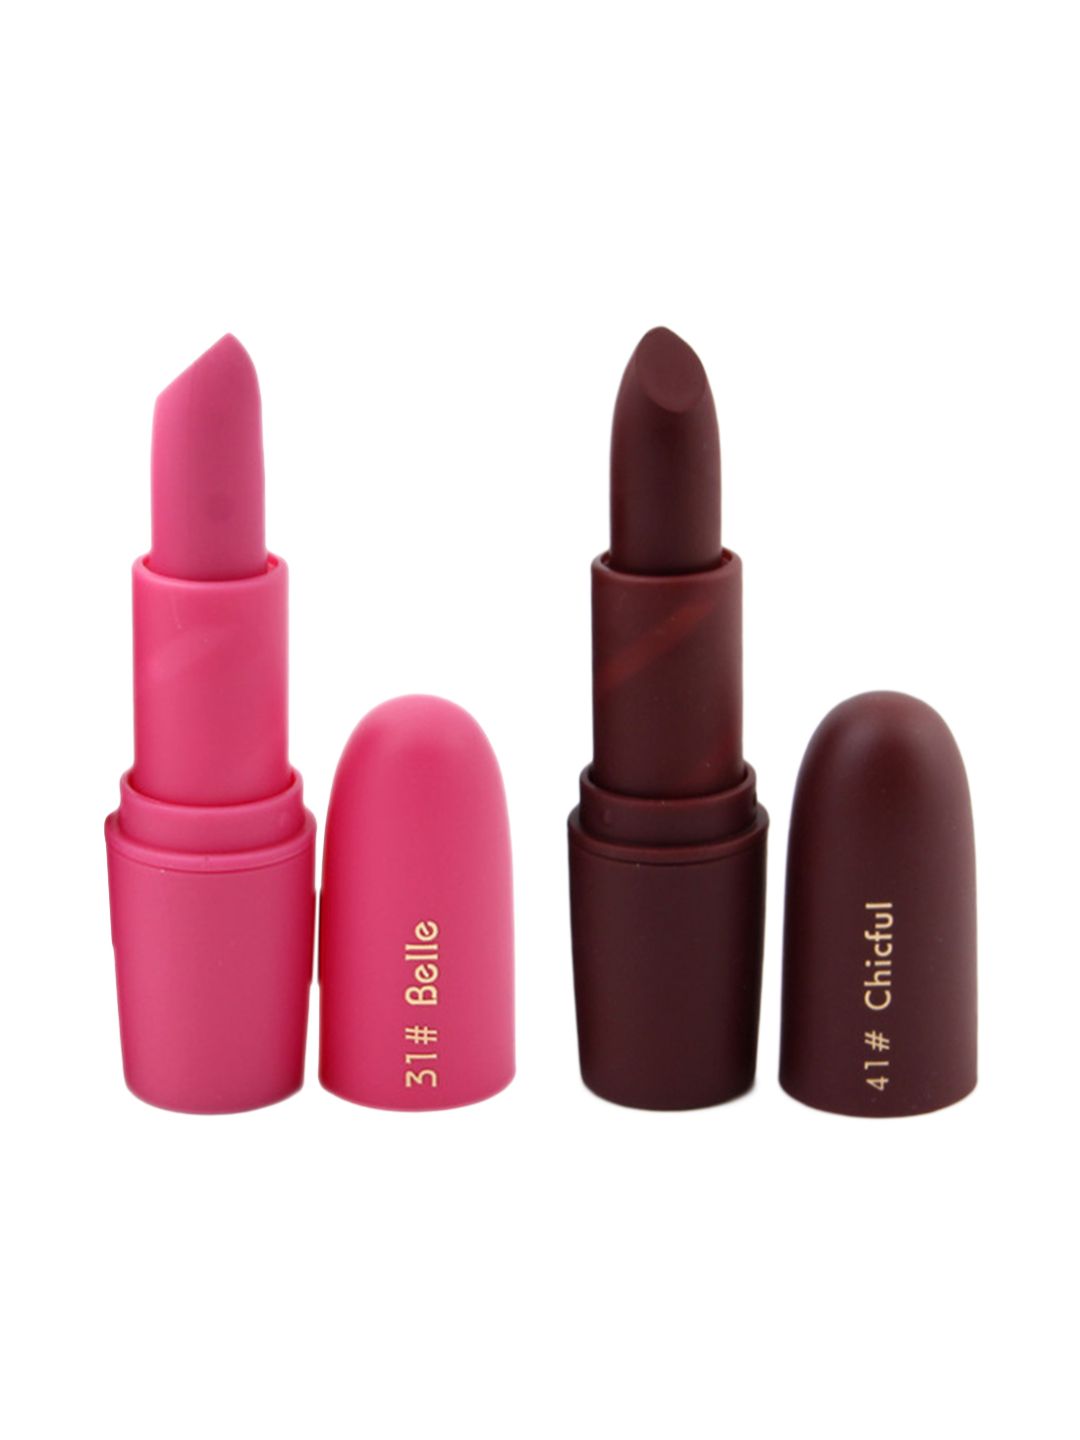 MISS ROSE Professional Make-Up Set of 2 Matte Creamy Lipsticks - Belle 31 & Chicful 41 Price in India